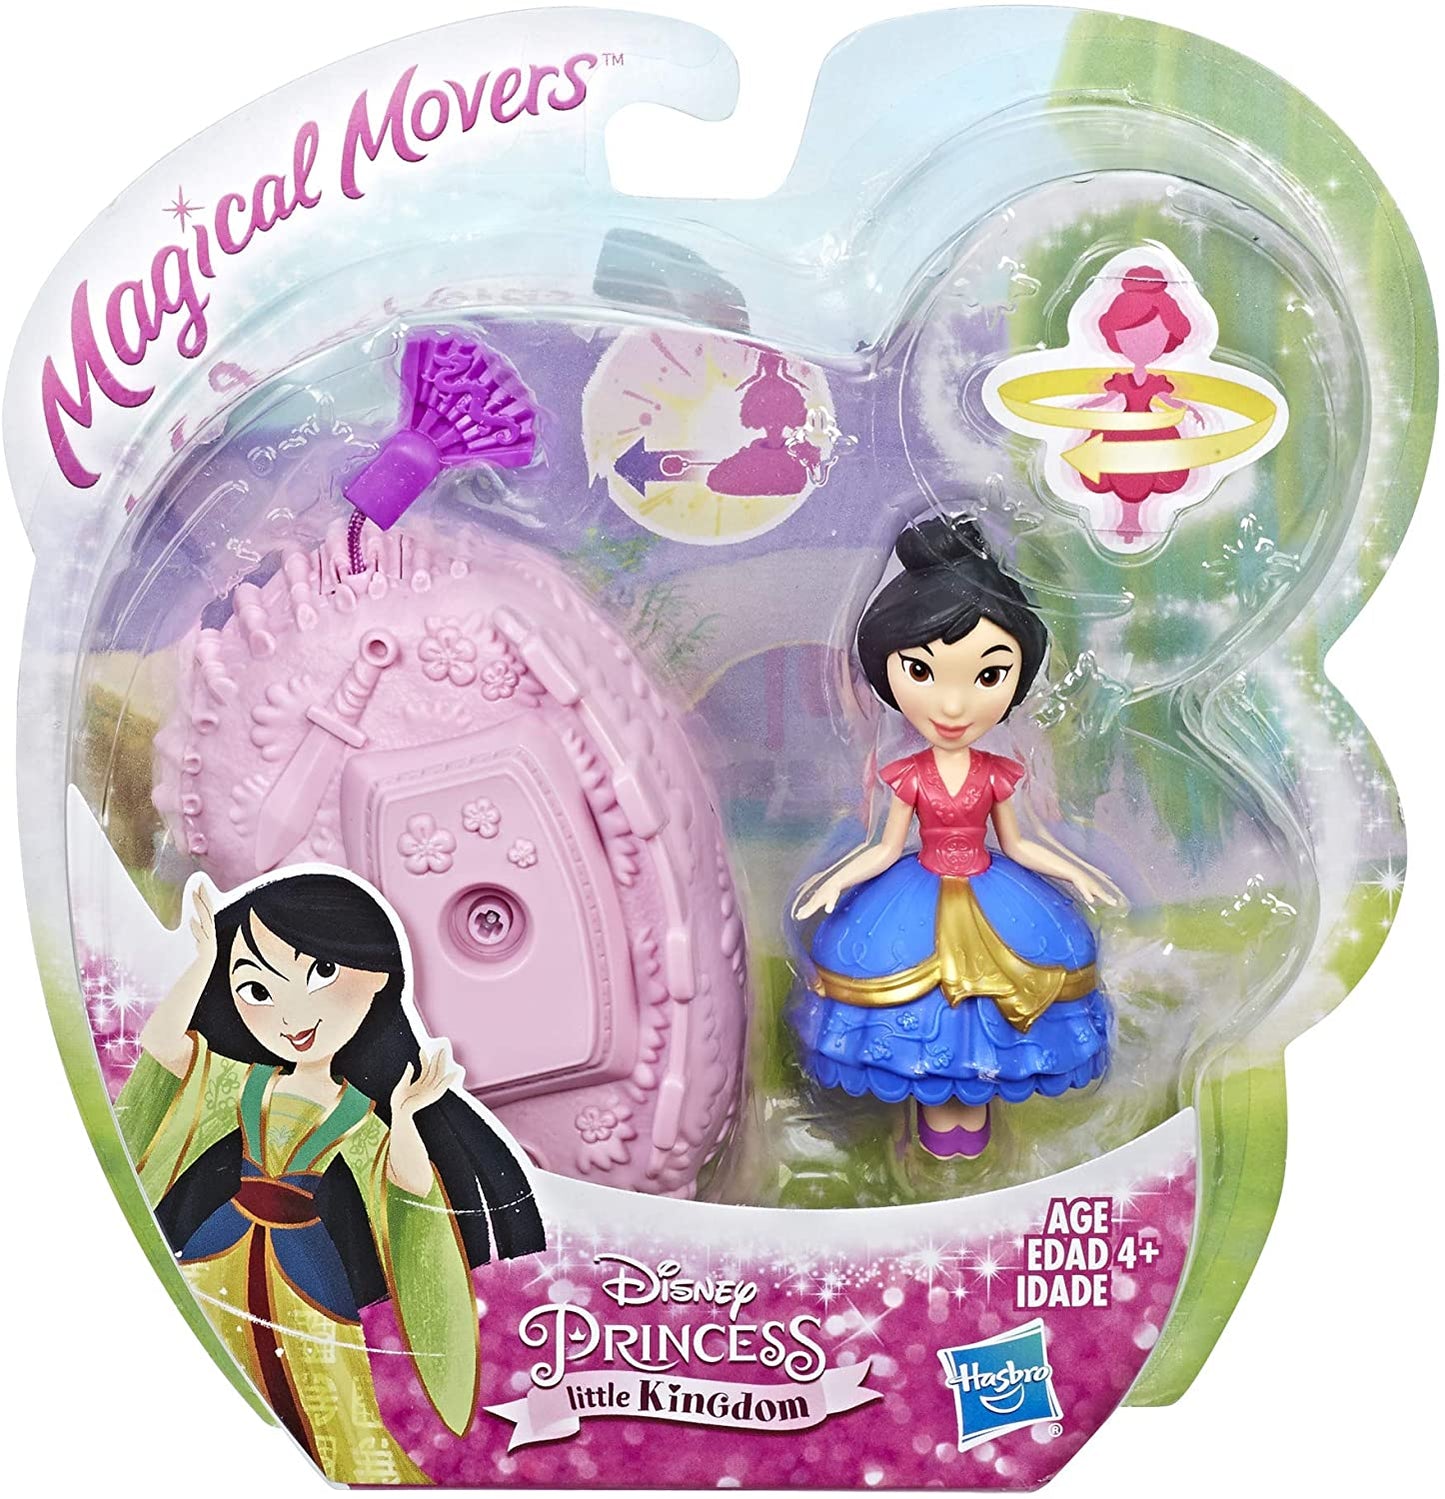 Disney Princess Magical Movers (Styles Vary)